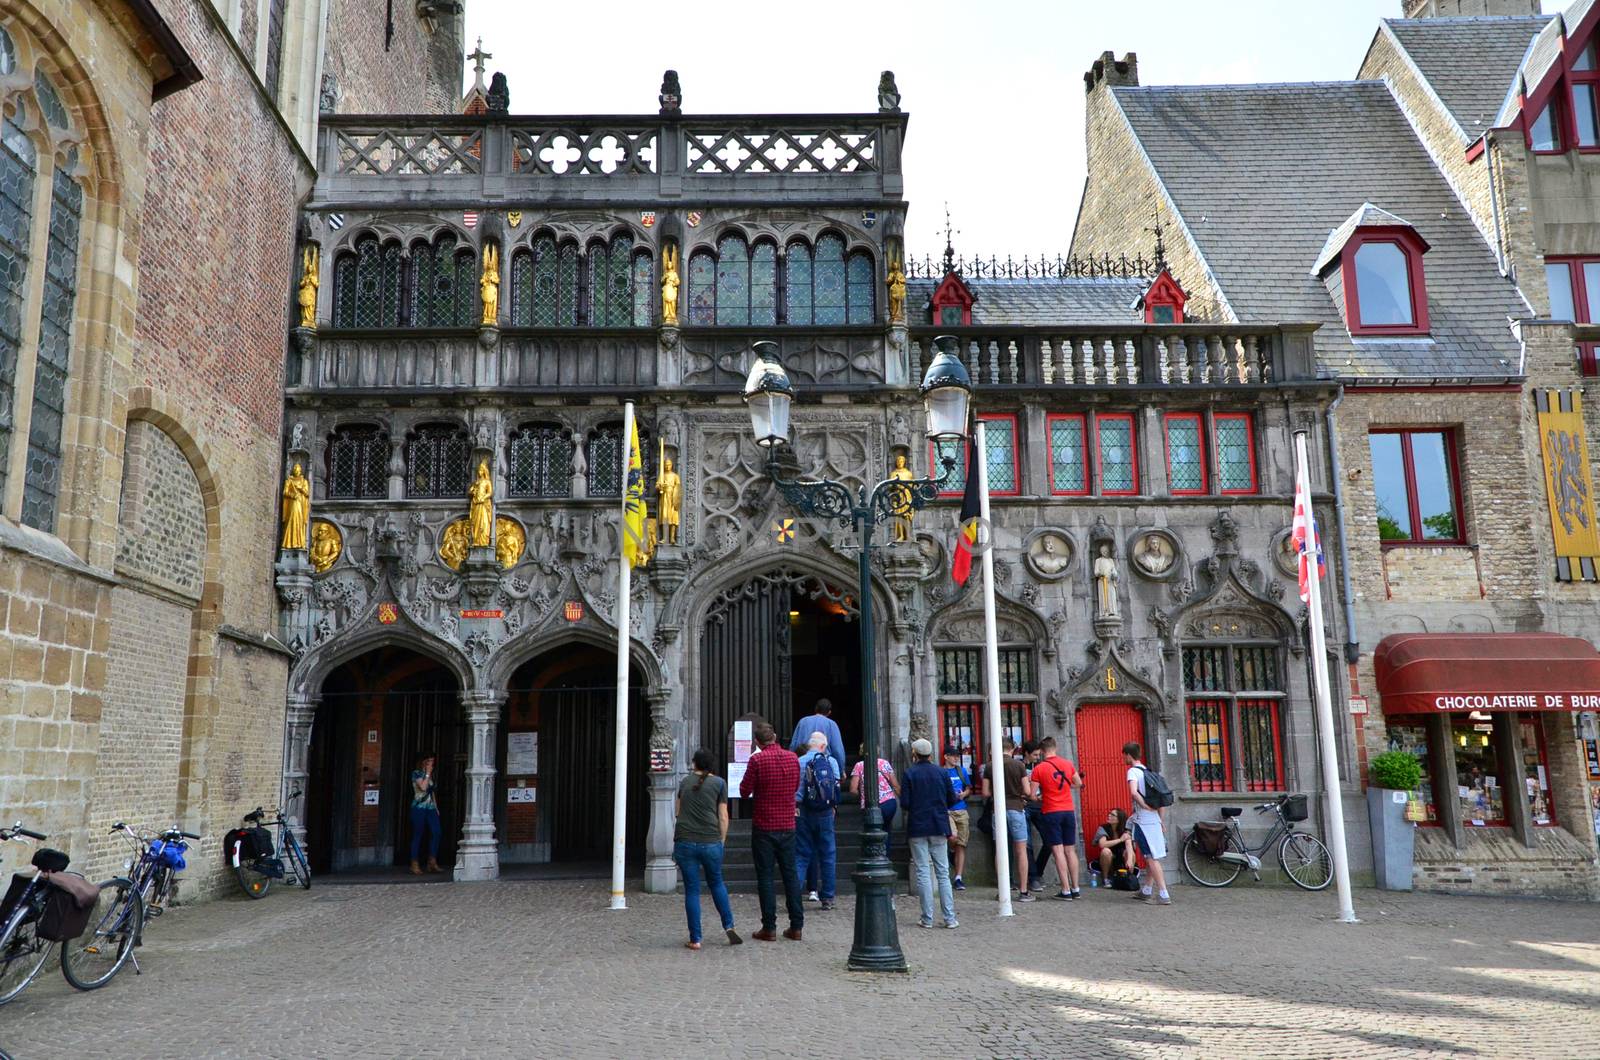 Bruges, Belgium - May 11, 2015: Tourist visit Basilica of the Holy Blood in Bruges by siraanamwong